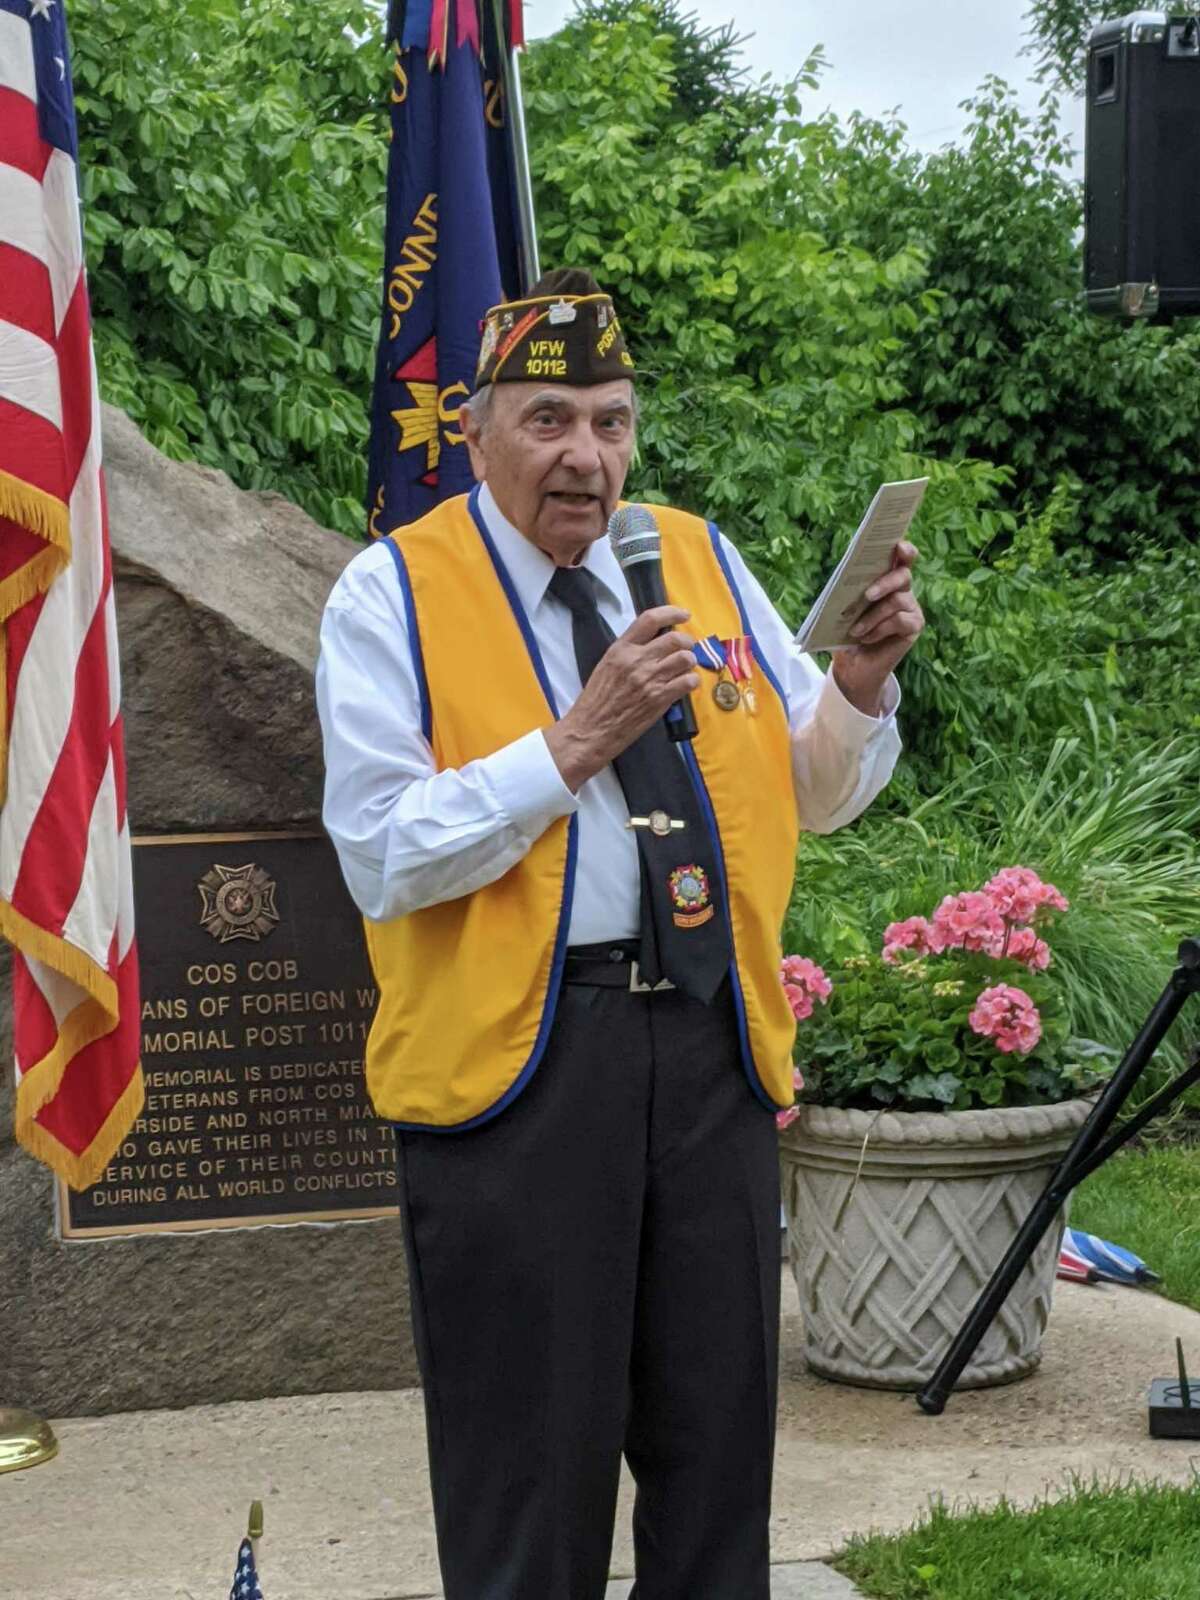 Cos Cob VFW Post 10112 Service Officer Anthony Marzullo speaks during Saturday’s Memorial Day ceremony.